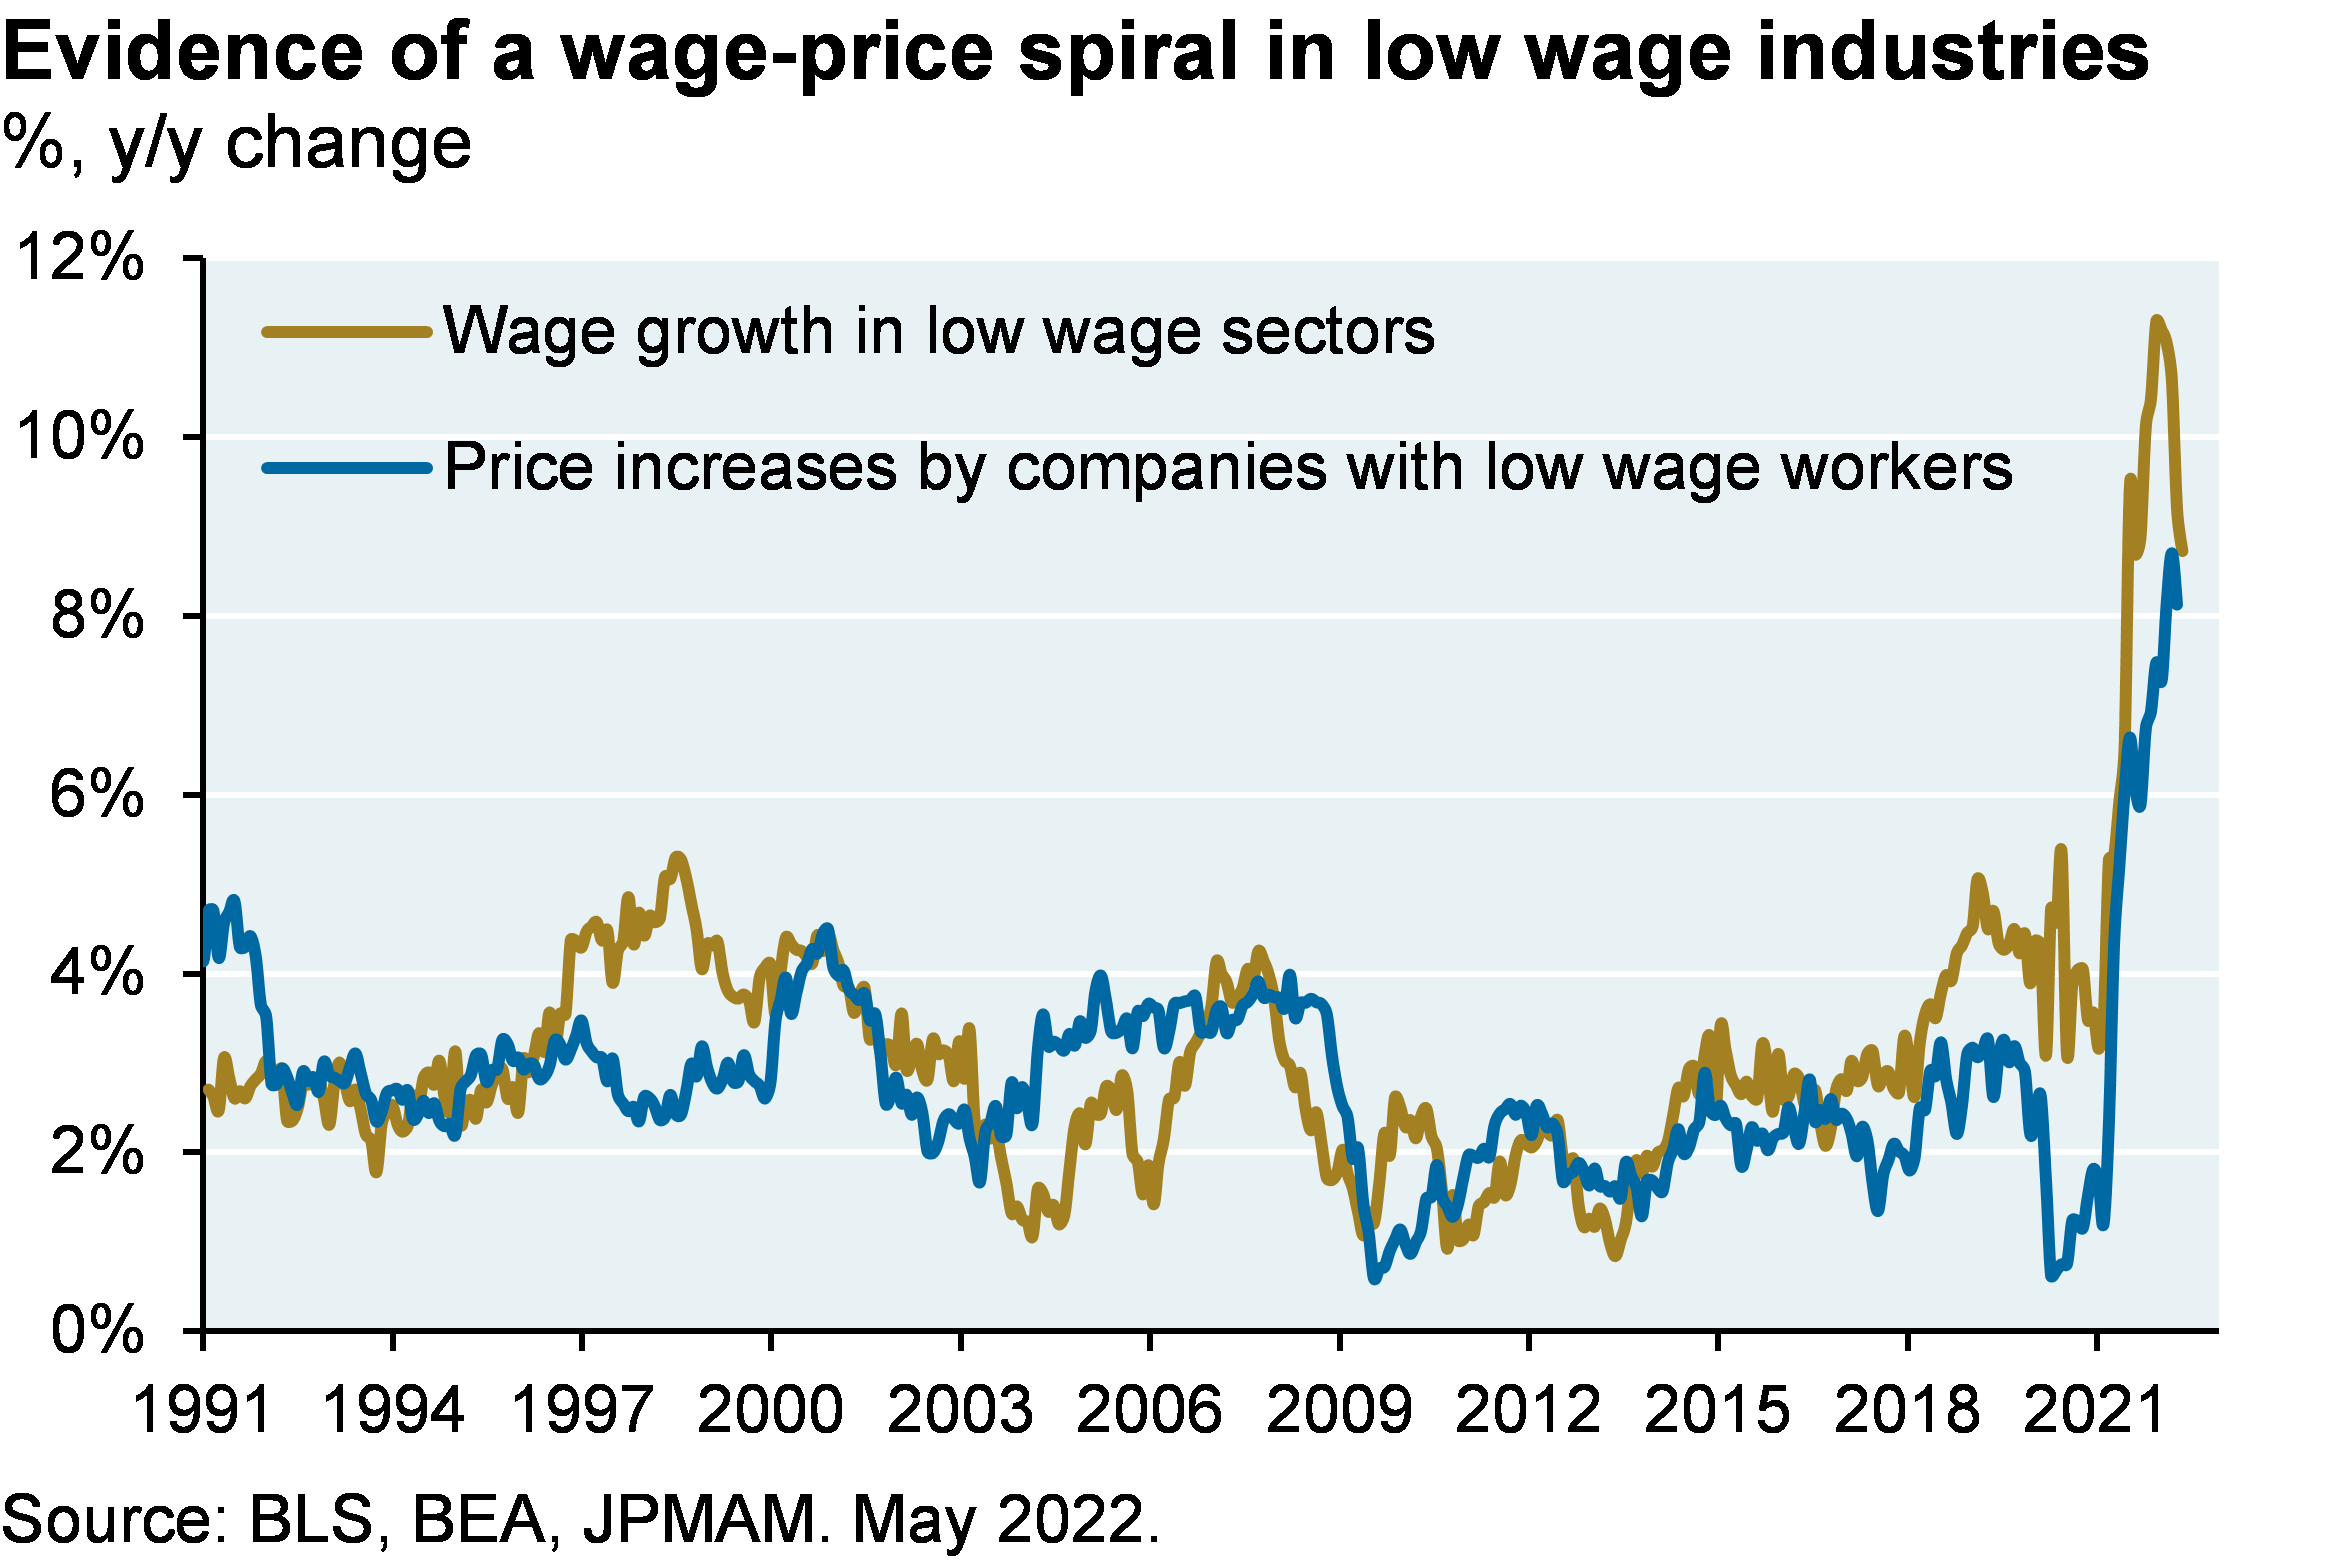 Evidence of a wage-price spiral in low wage industries